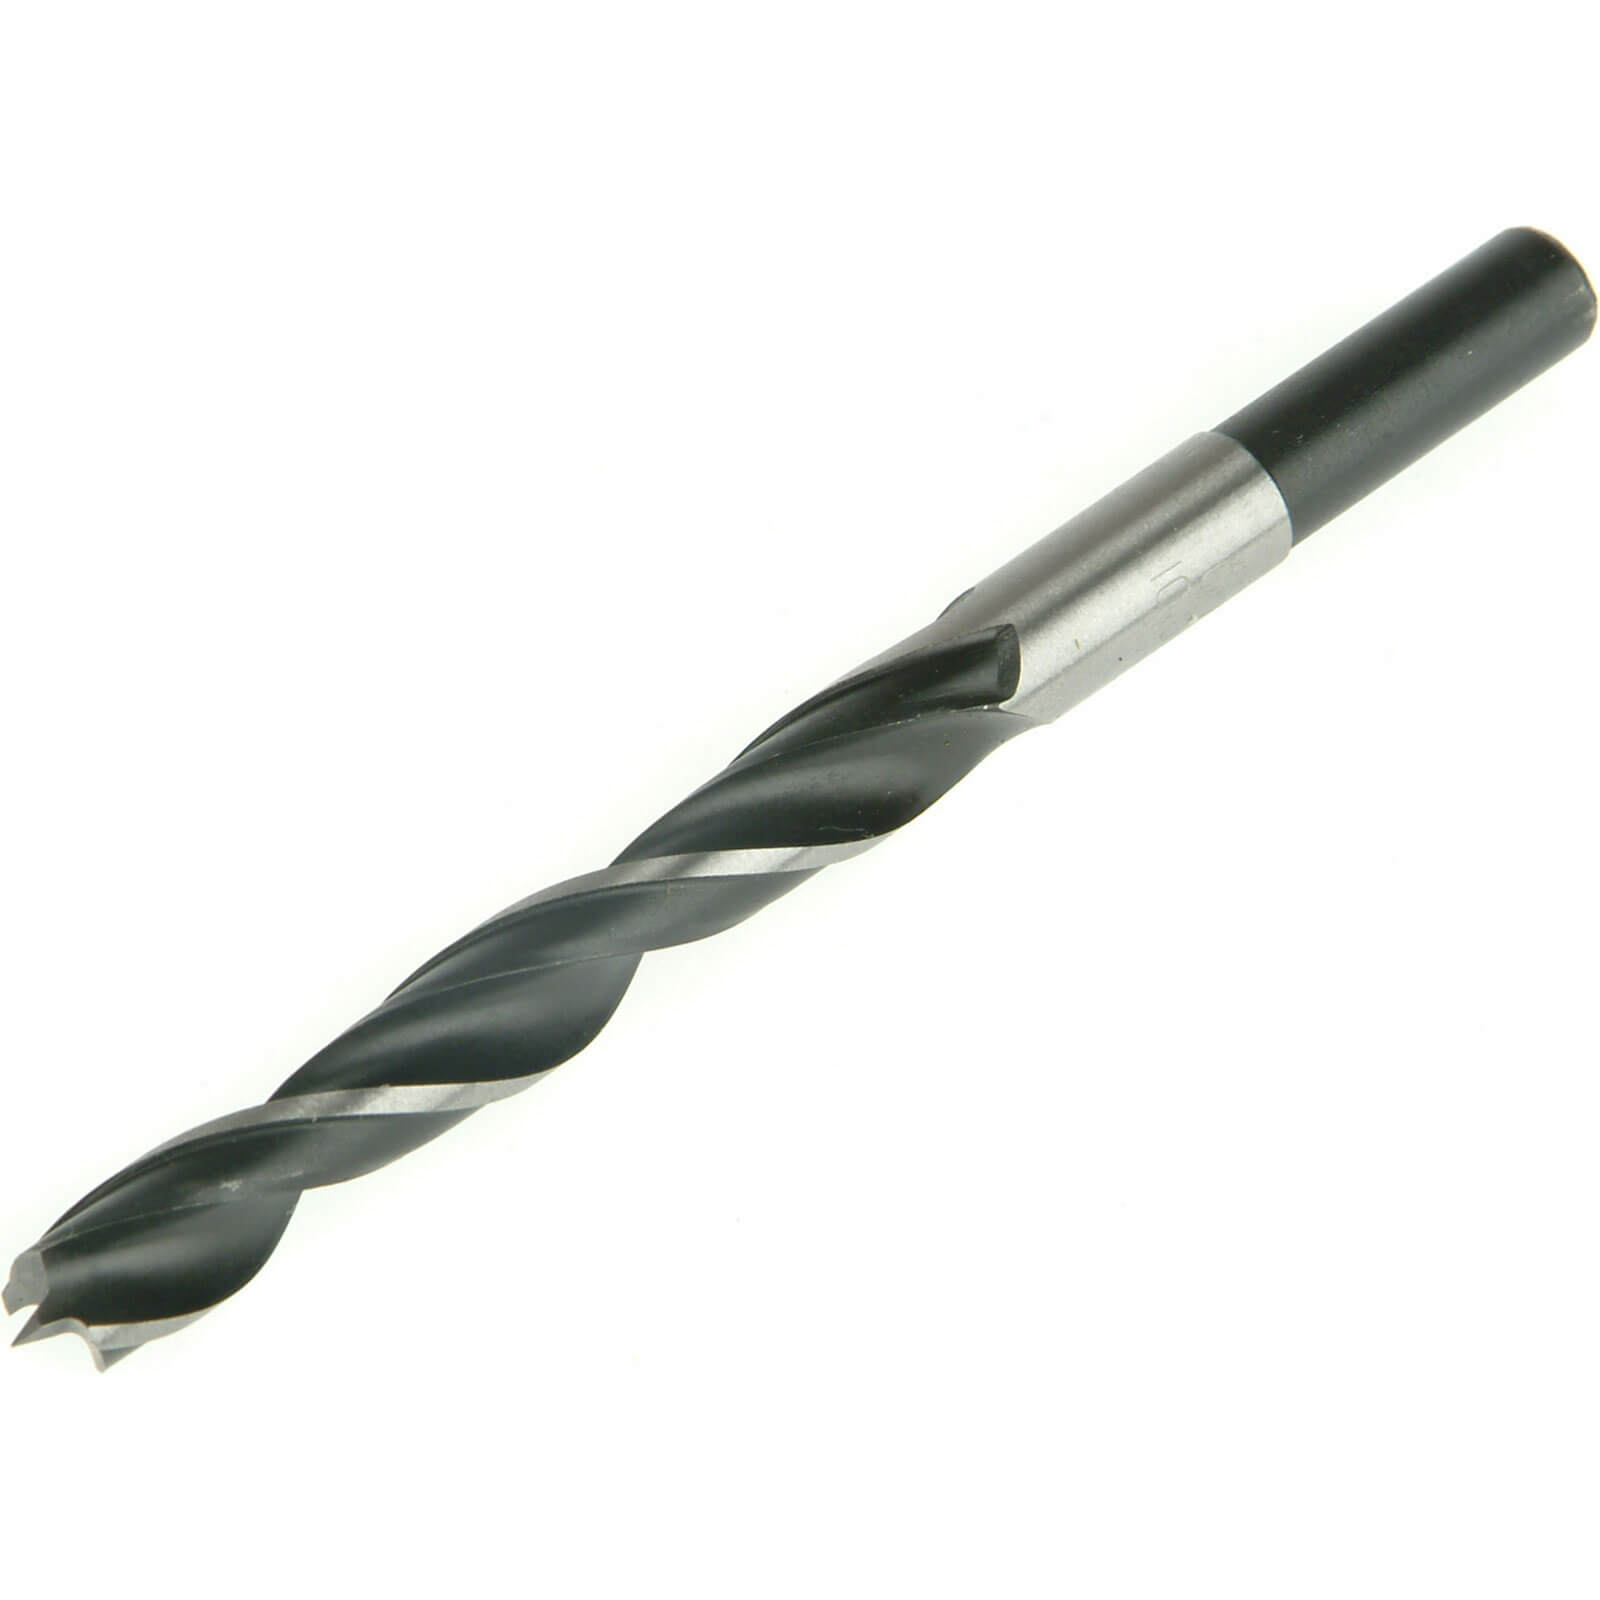 Photo of Faithfull Lip And Spur Wood Drill Bit 14mm